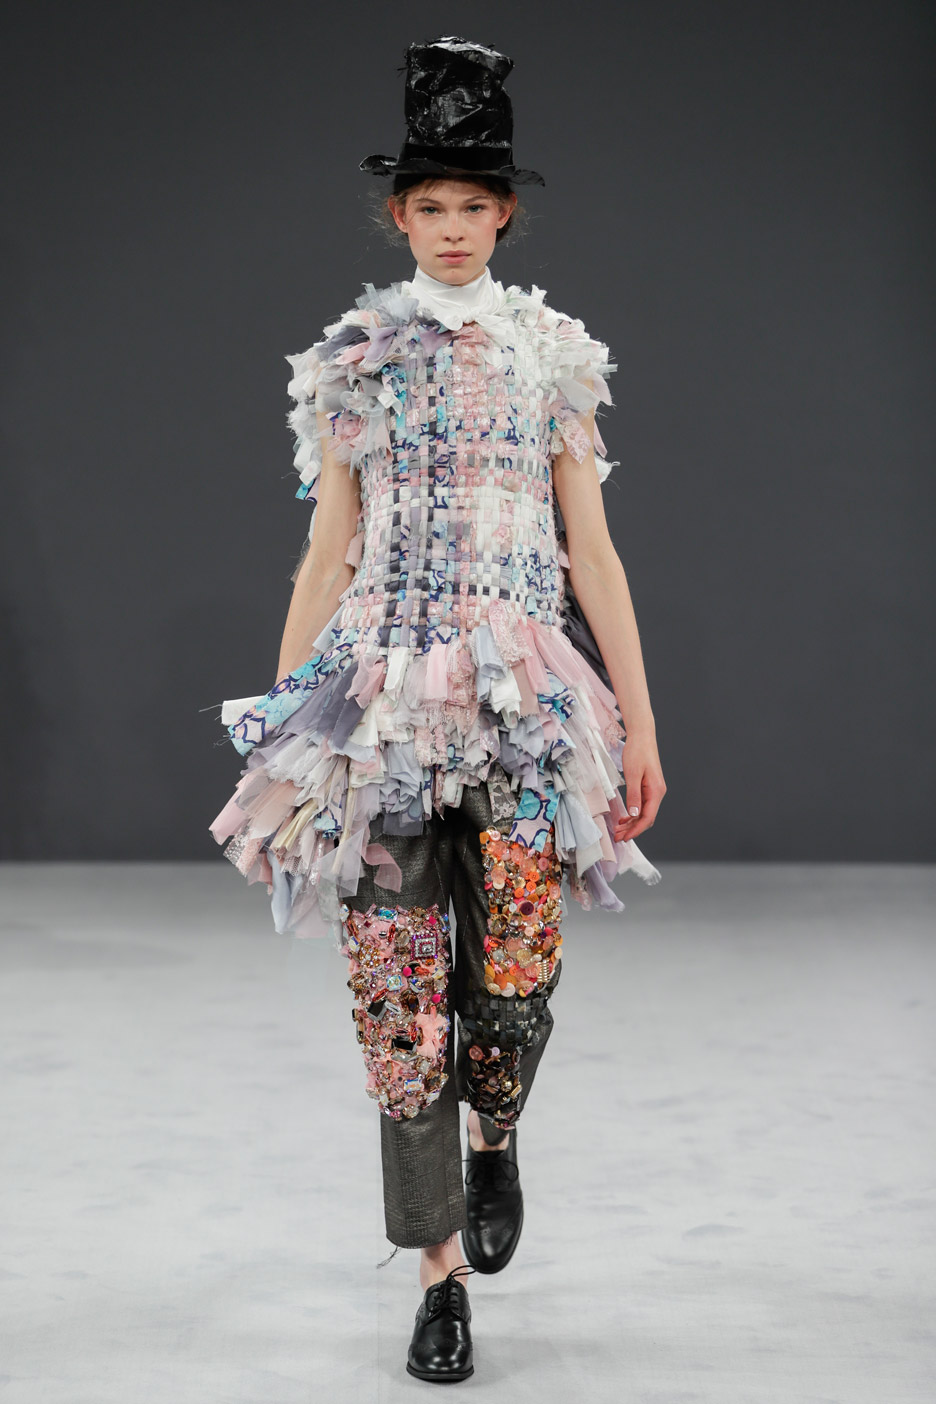 Viktor & Rolf couture garments made from recycled fabrics